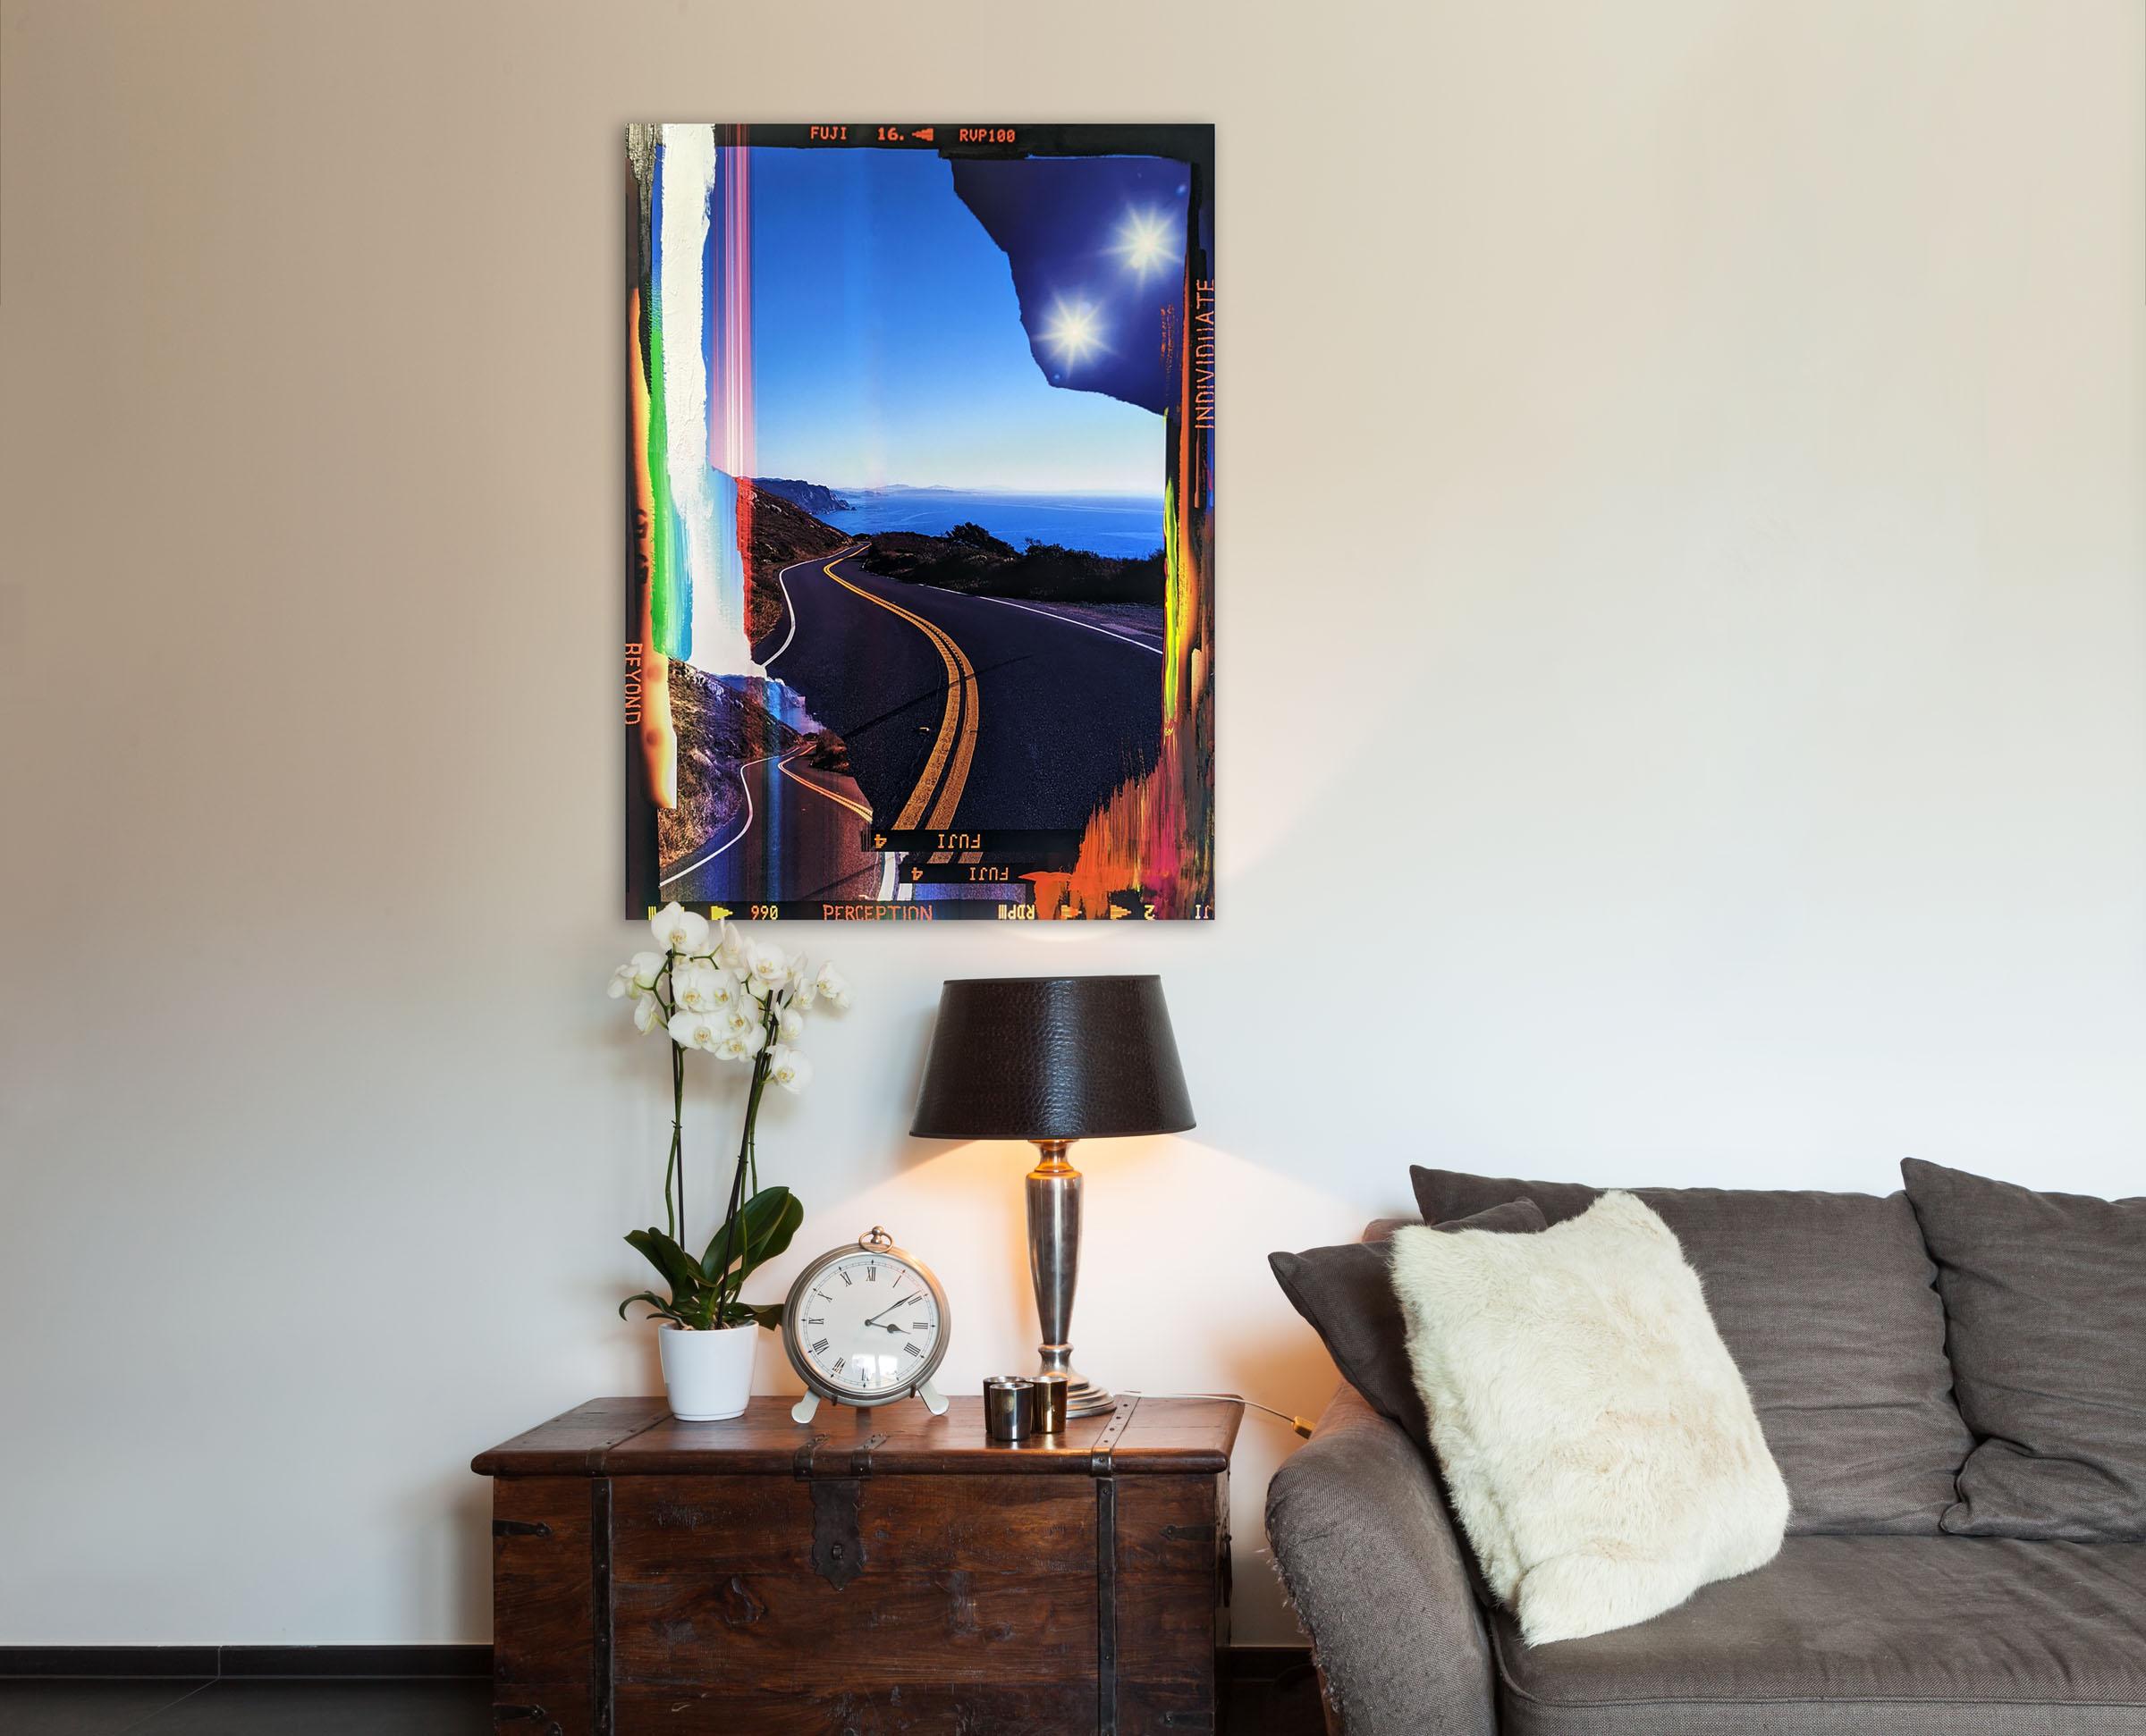 Meta Road, Individuate, California Hwy 1 (Abstract Photography)
Photograph Acrylic Paint on wood mount - Unframed
Artwork exclusive to IdeelArt.

Artworks are of the highest archival standards. Wood supports are sealed with two coats of Golden